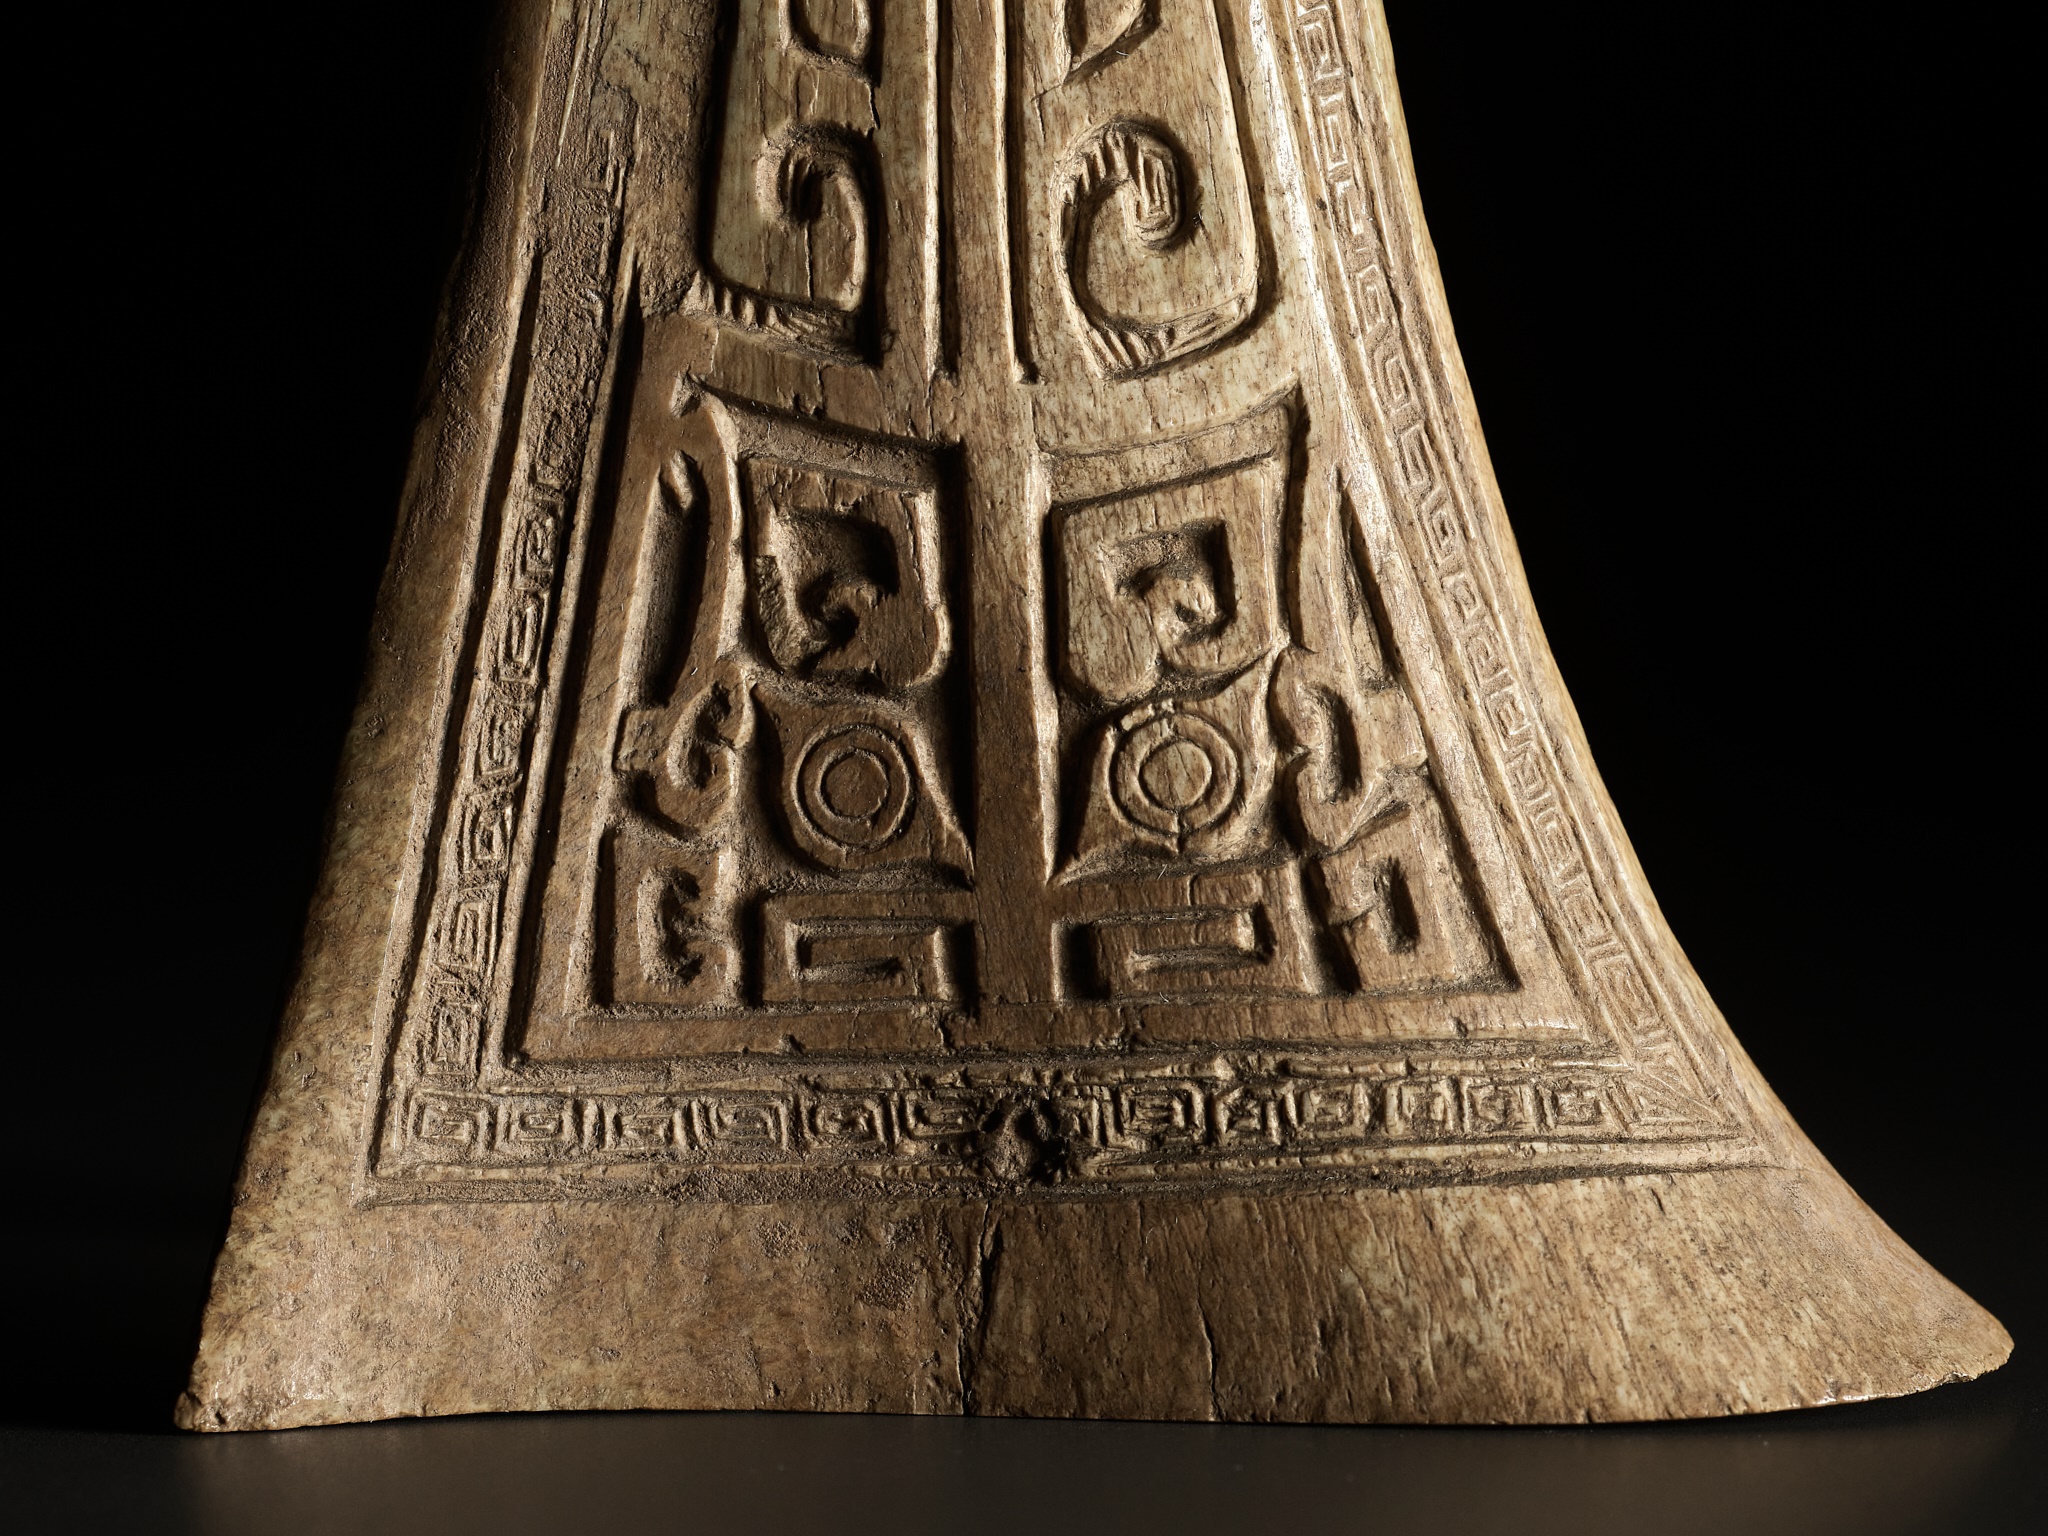 AN ARCHAIC CEREMONIAL BONE CARVING, SHANG DYNASTY - Image 7 of 16